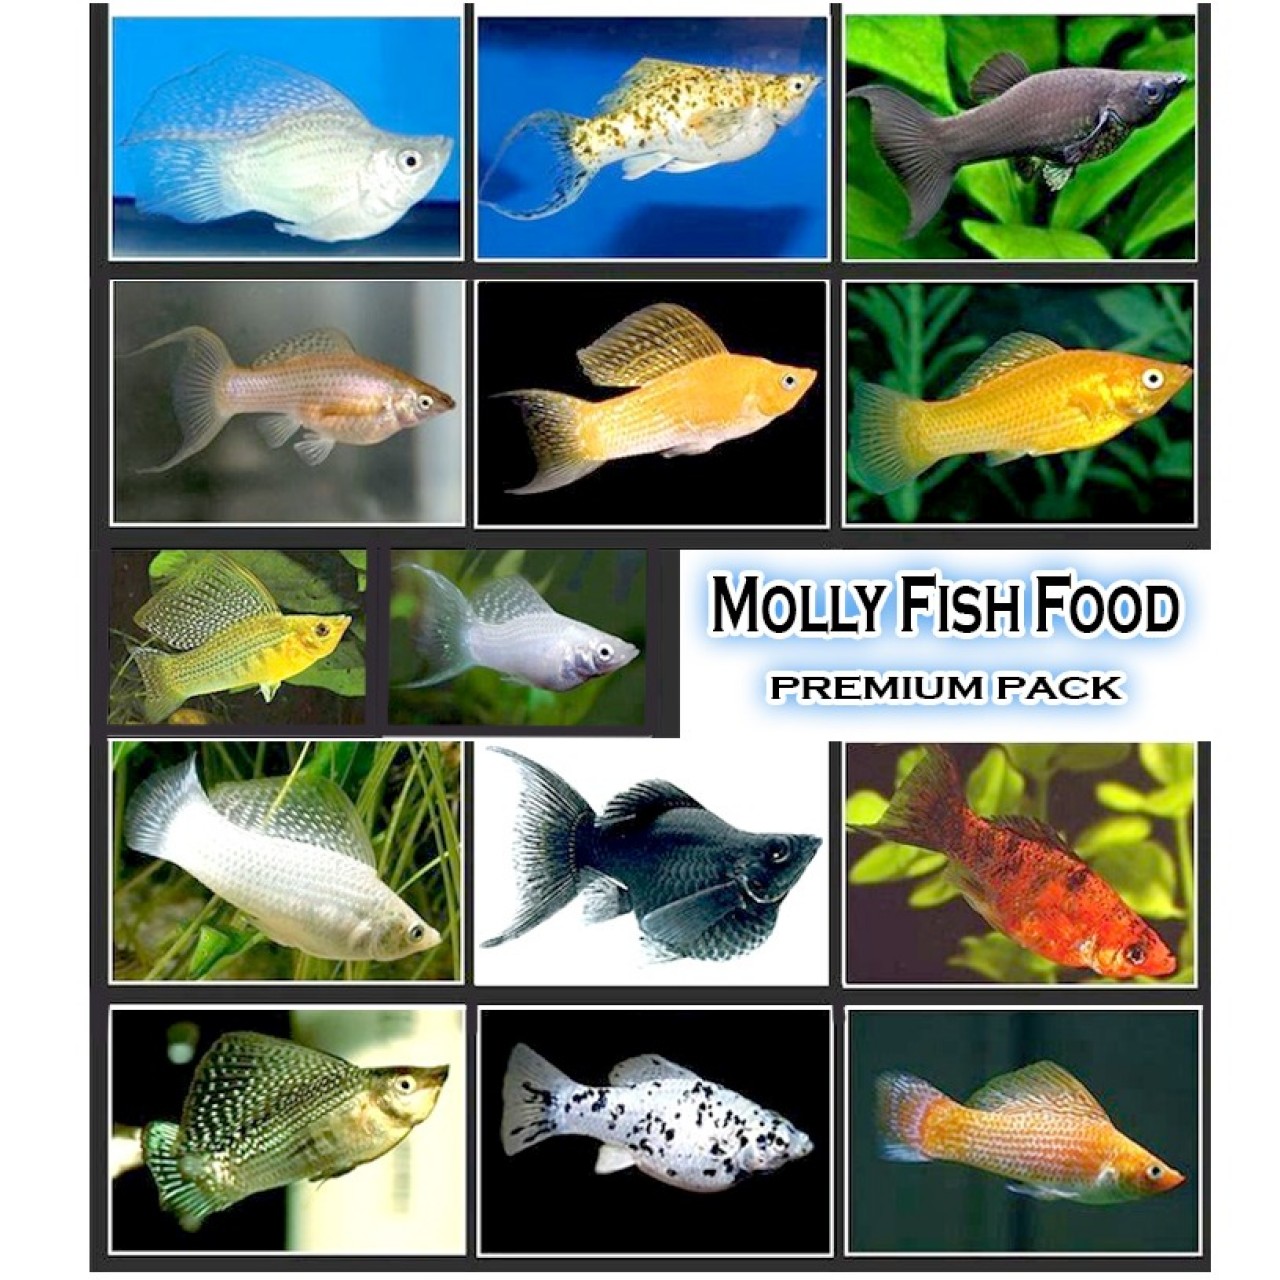 Fish Food For All Species Of Molly'S/Mollies - Premium Pack